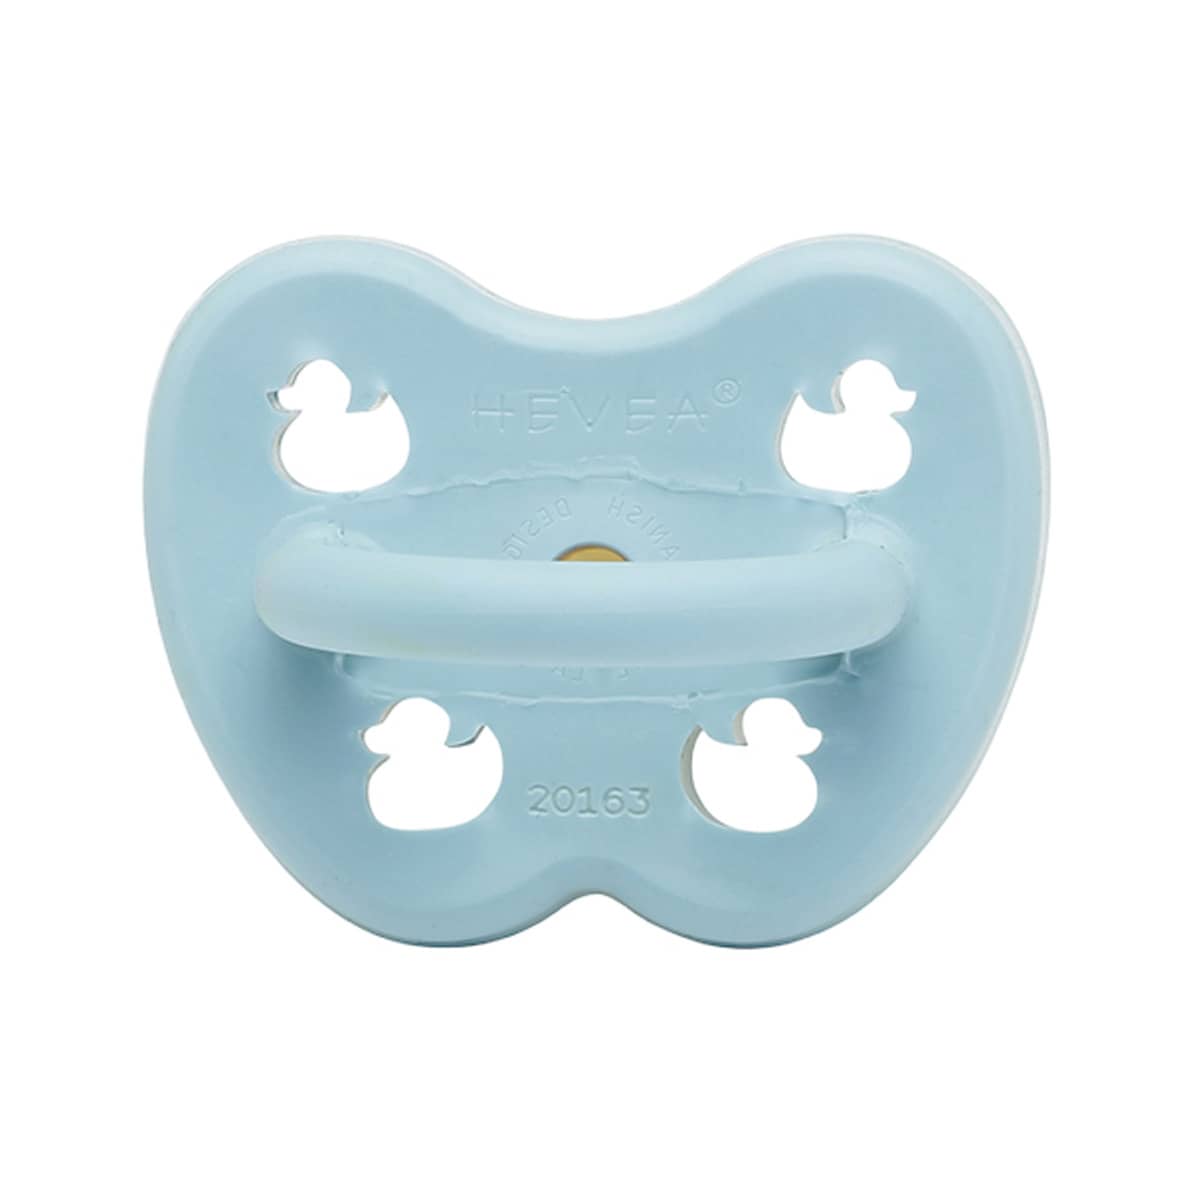 Hevea Natural Rubber Colour Pacifier - Standard Round Teat - Baby Blue 0-3 Months